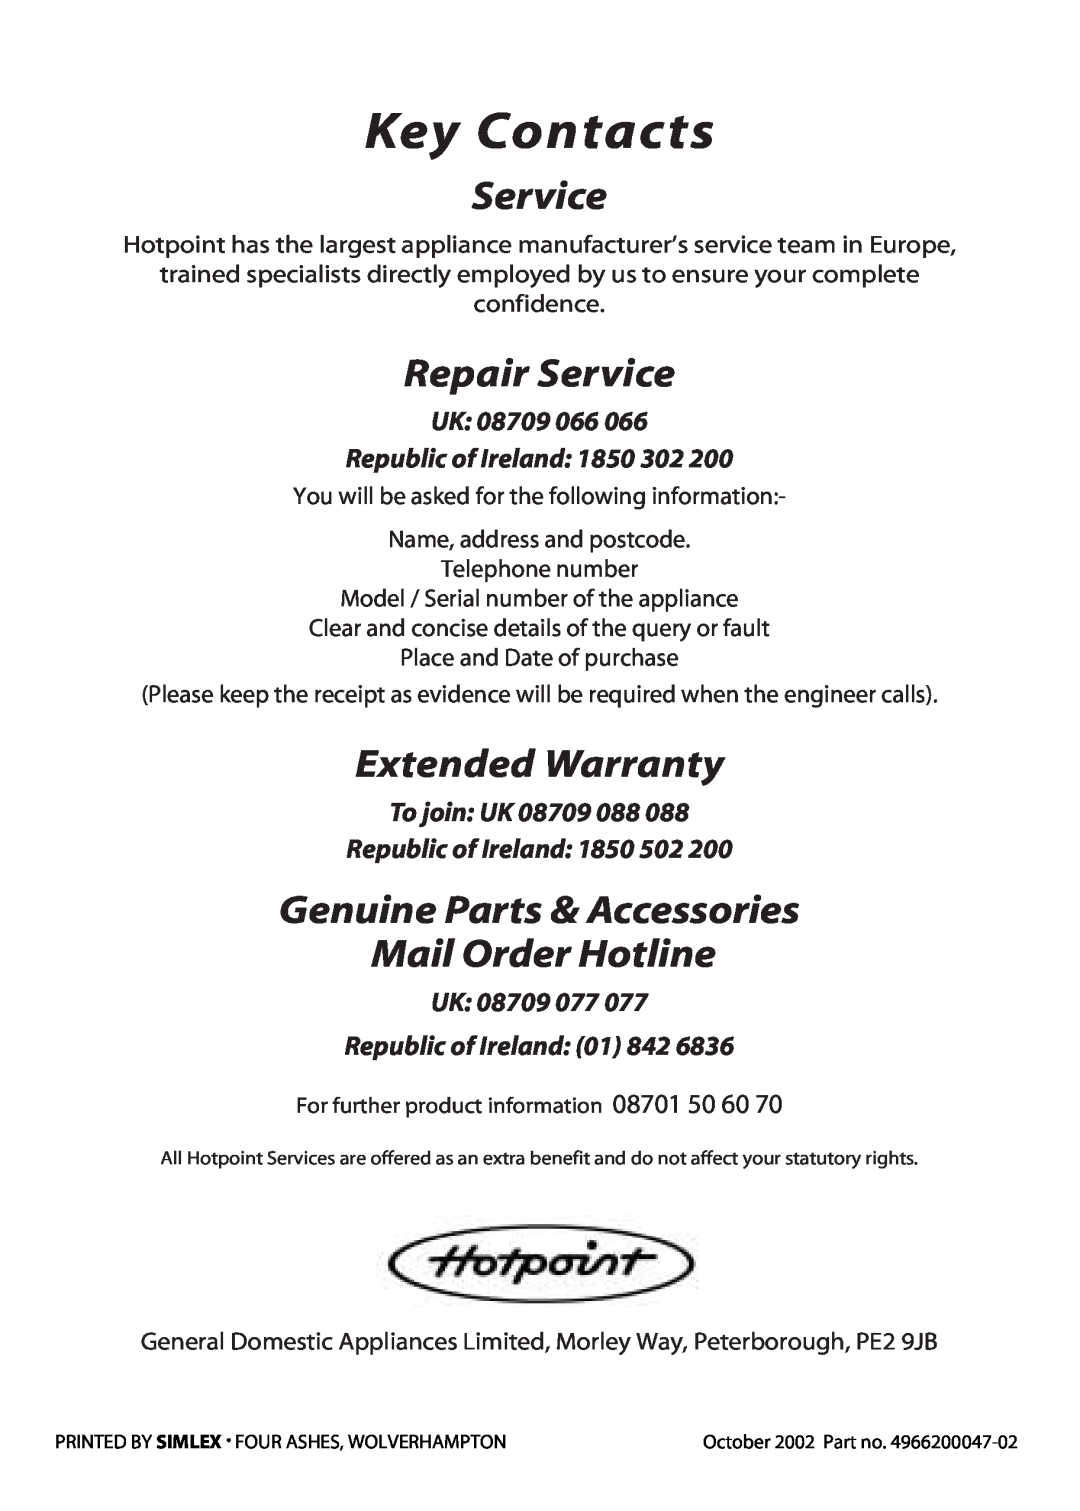 Hotpoint EW22 manual Key Contacts, Repair Service, Extended Warranty, Genuine Parts & Accessories Mail Order Hotline 